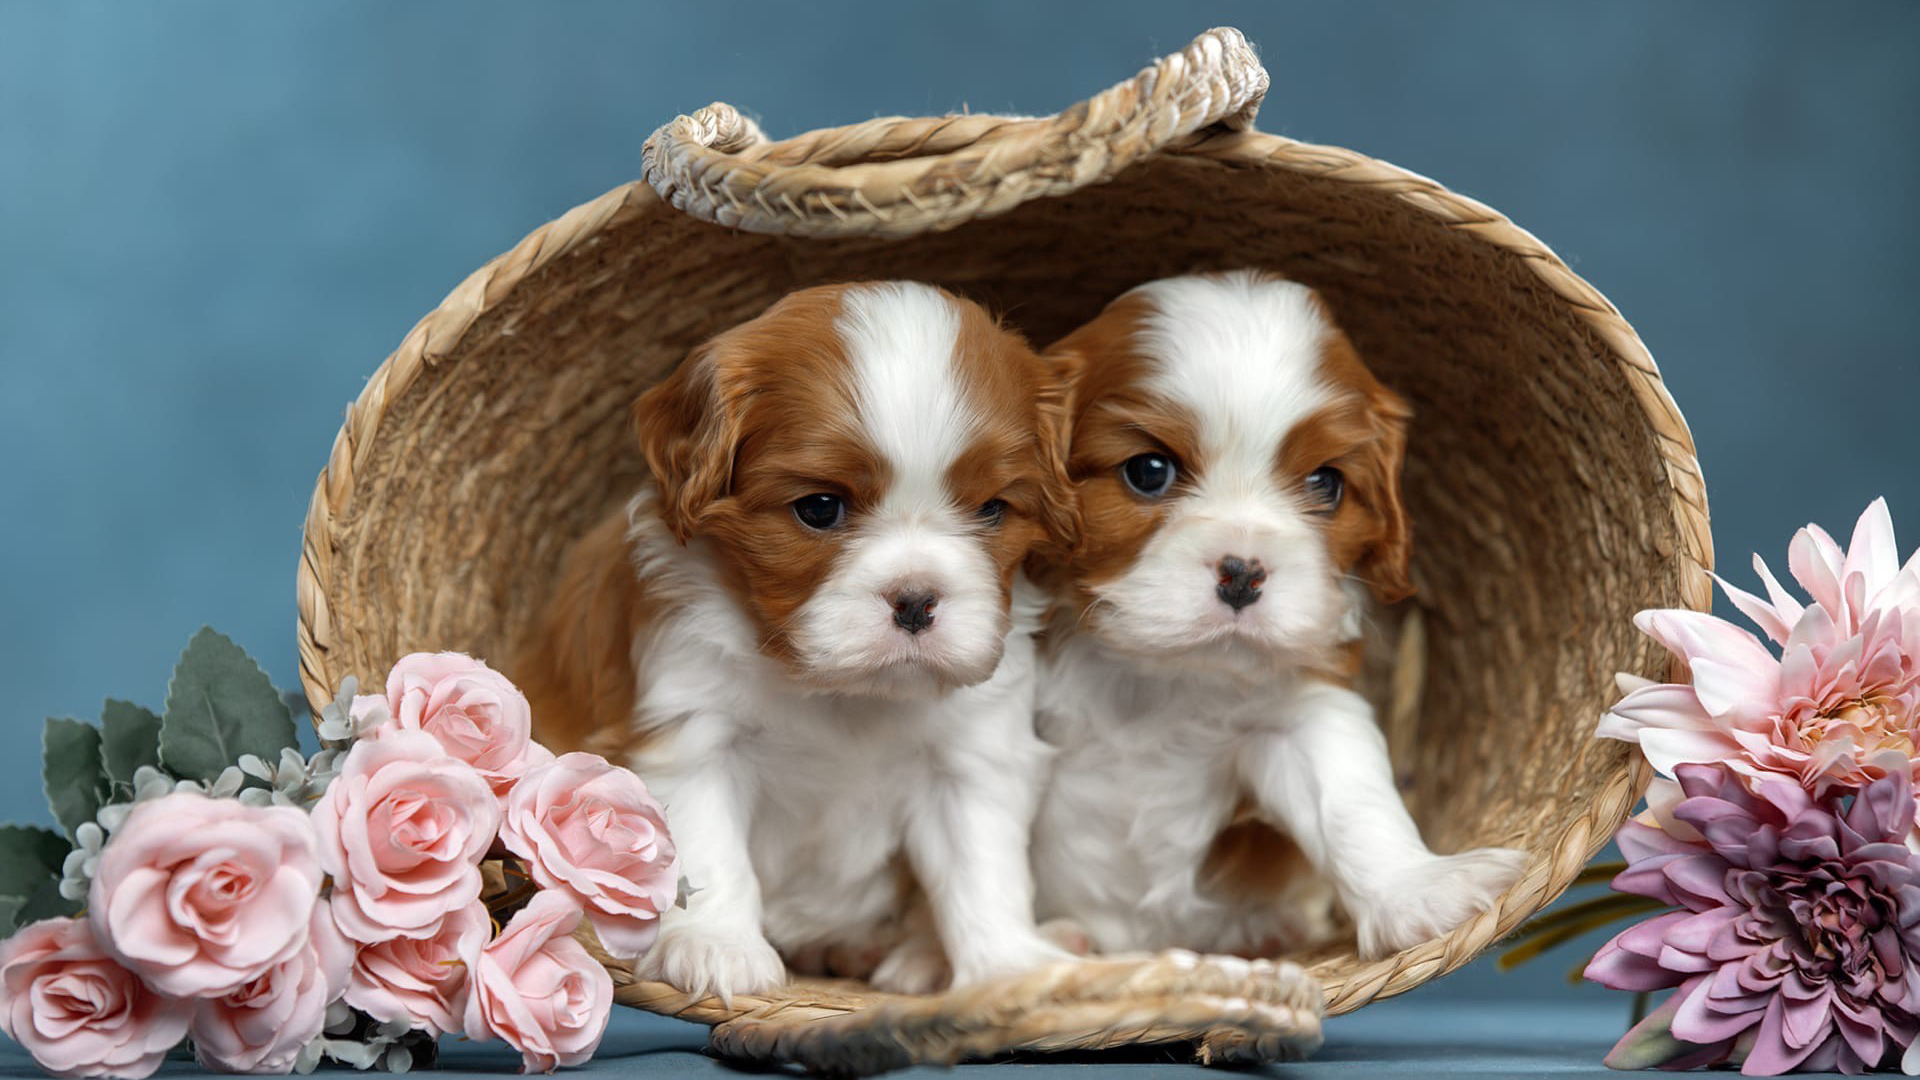 Two King Charles Spaniel Dogs Are Sitting Inside Bamboo Basket 2K Dog